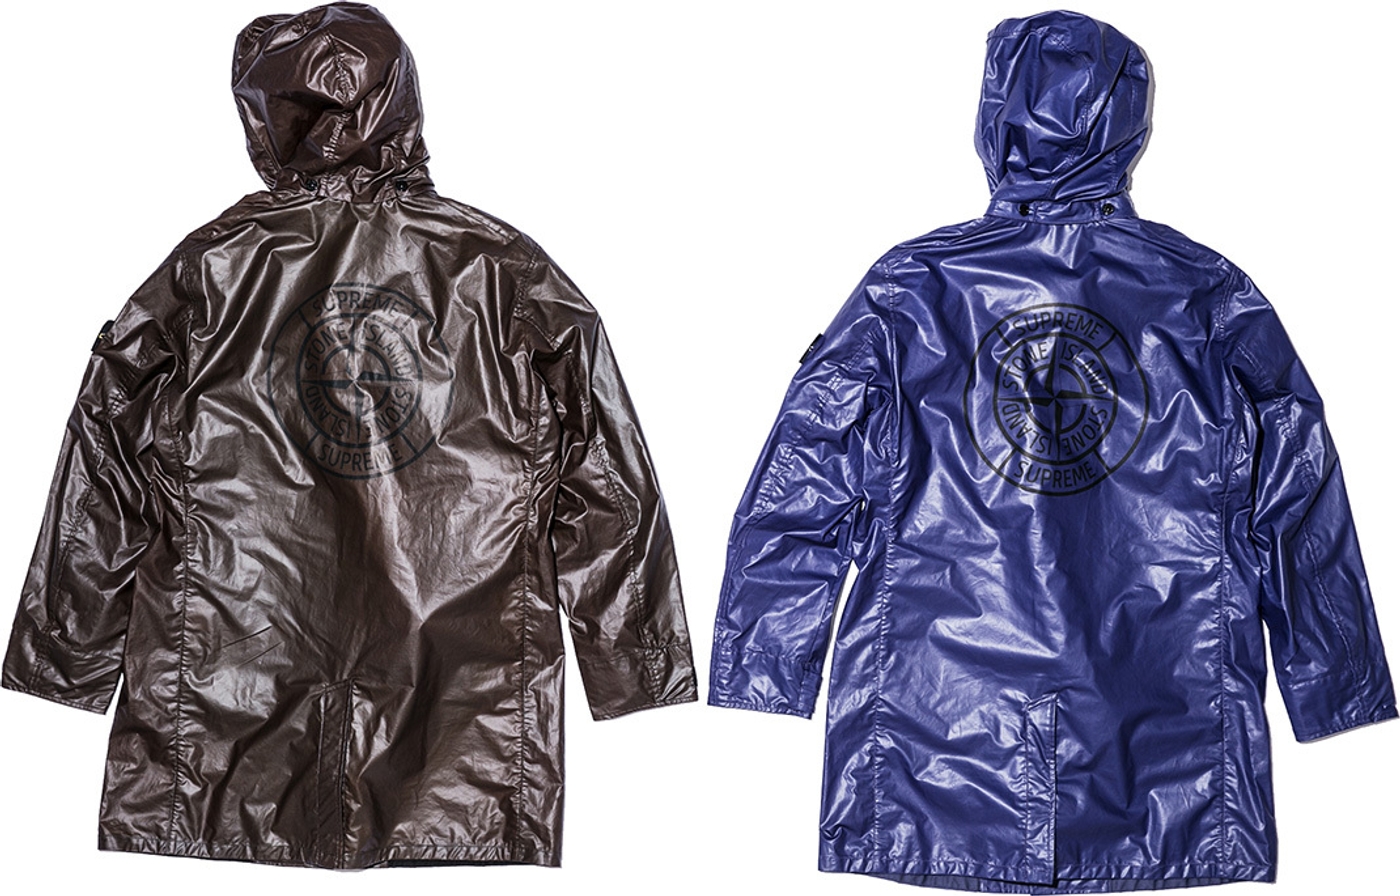 Water resistant thermosensitive Heat Reactive polyurethane coated cotton fabric with removable hood. (10/24)